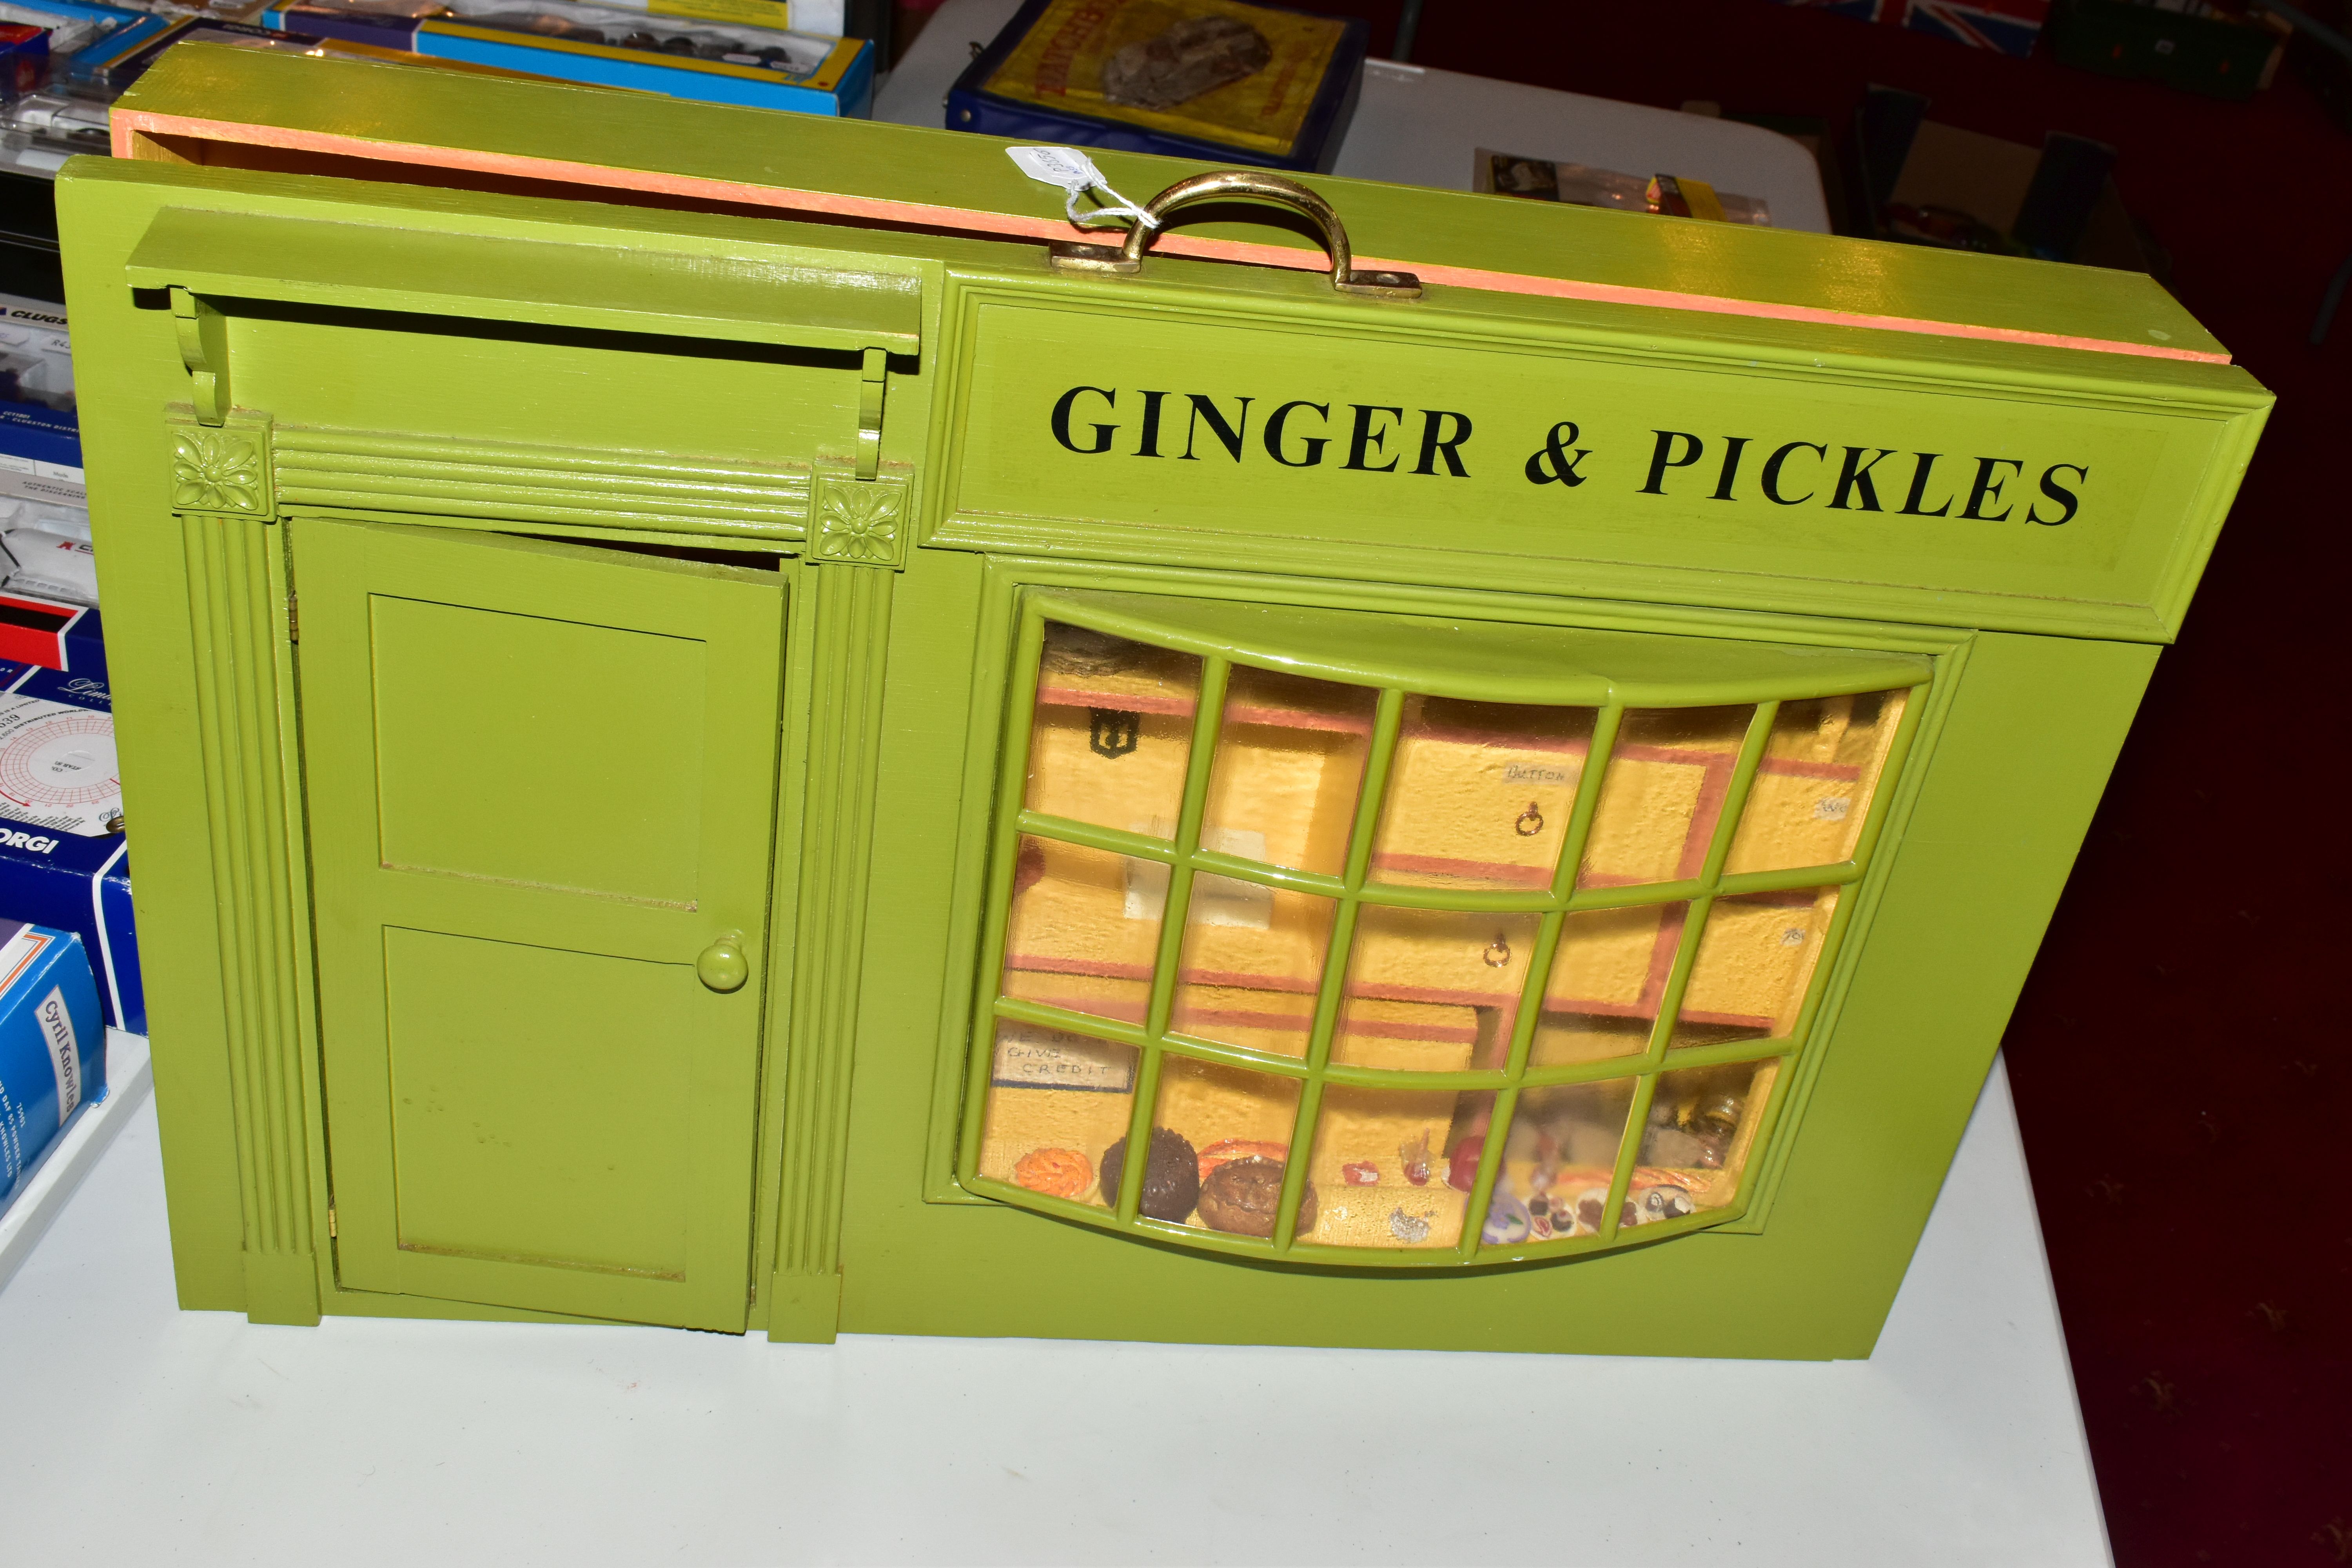 A WOODEN TOY GINGER & PICKLES SHOP AND CONTENTS, green painted Georgian style shopfront with bow - Image 10 of 11